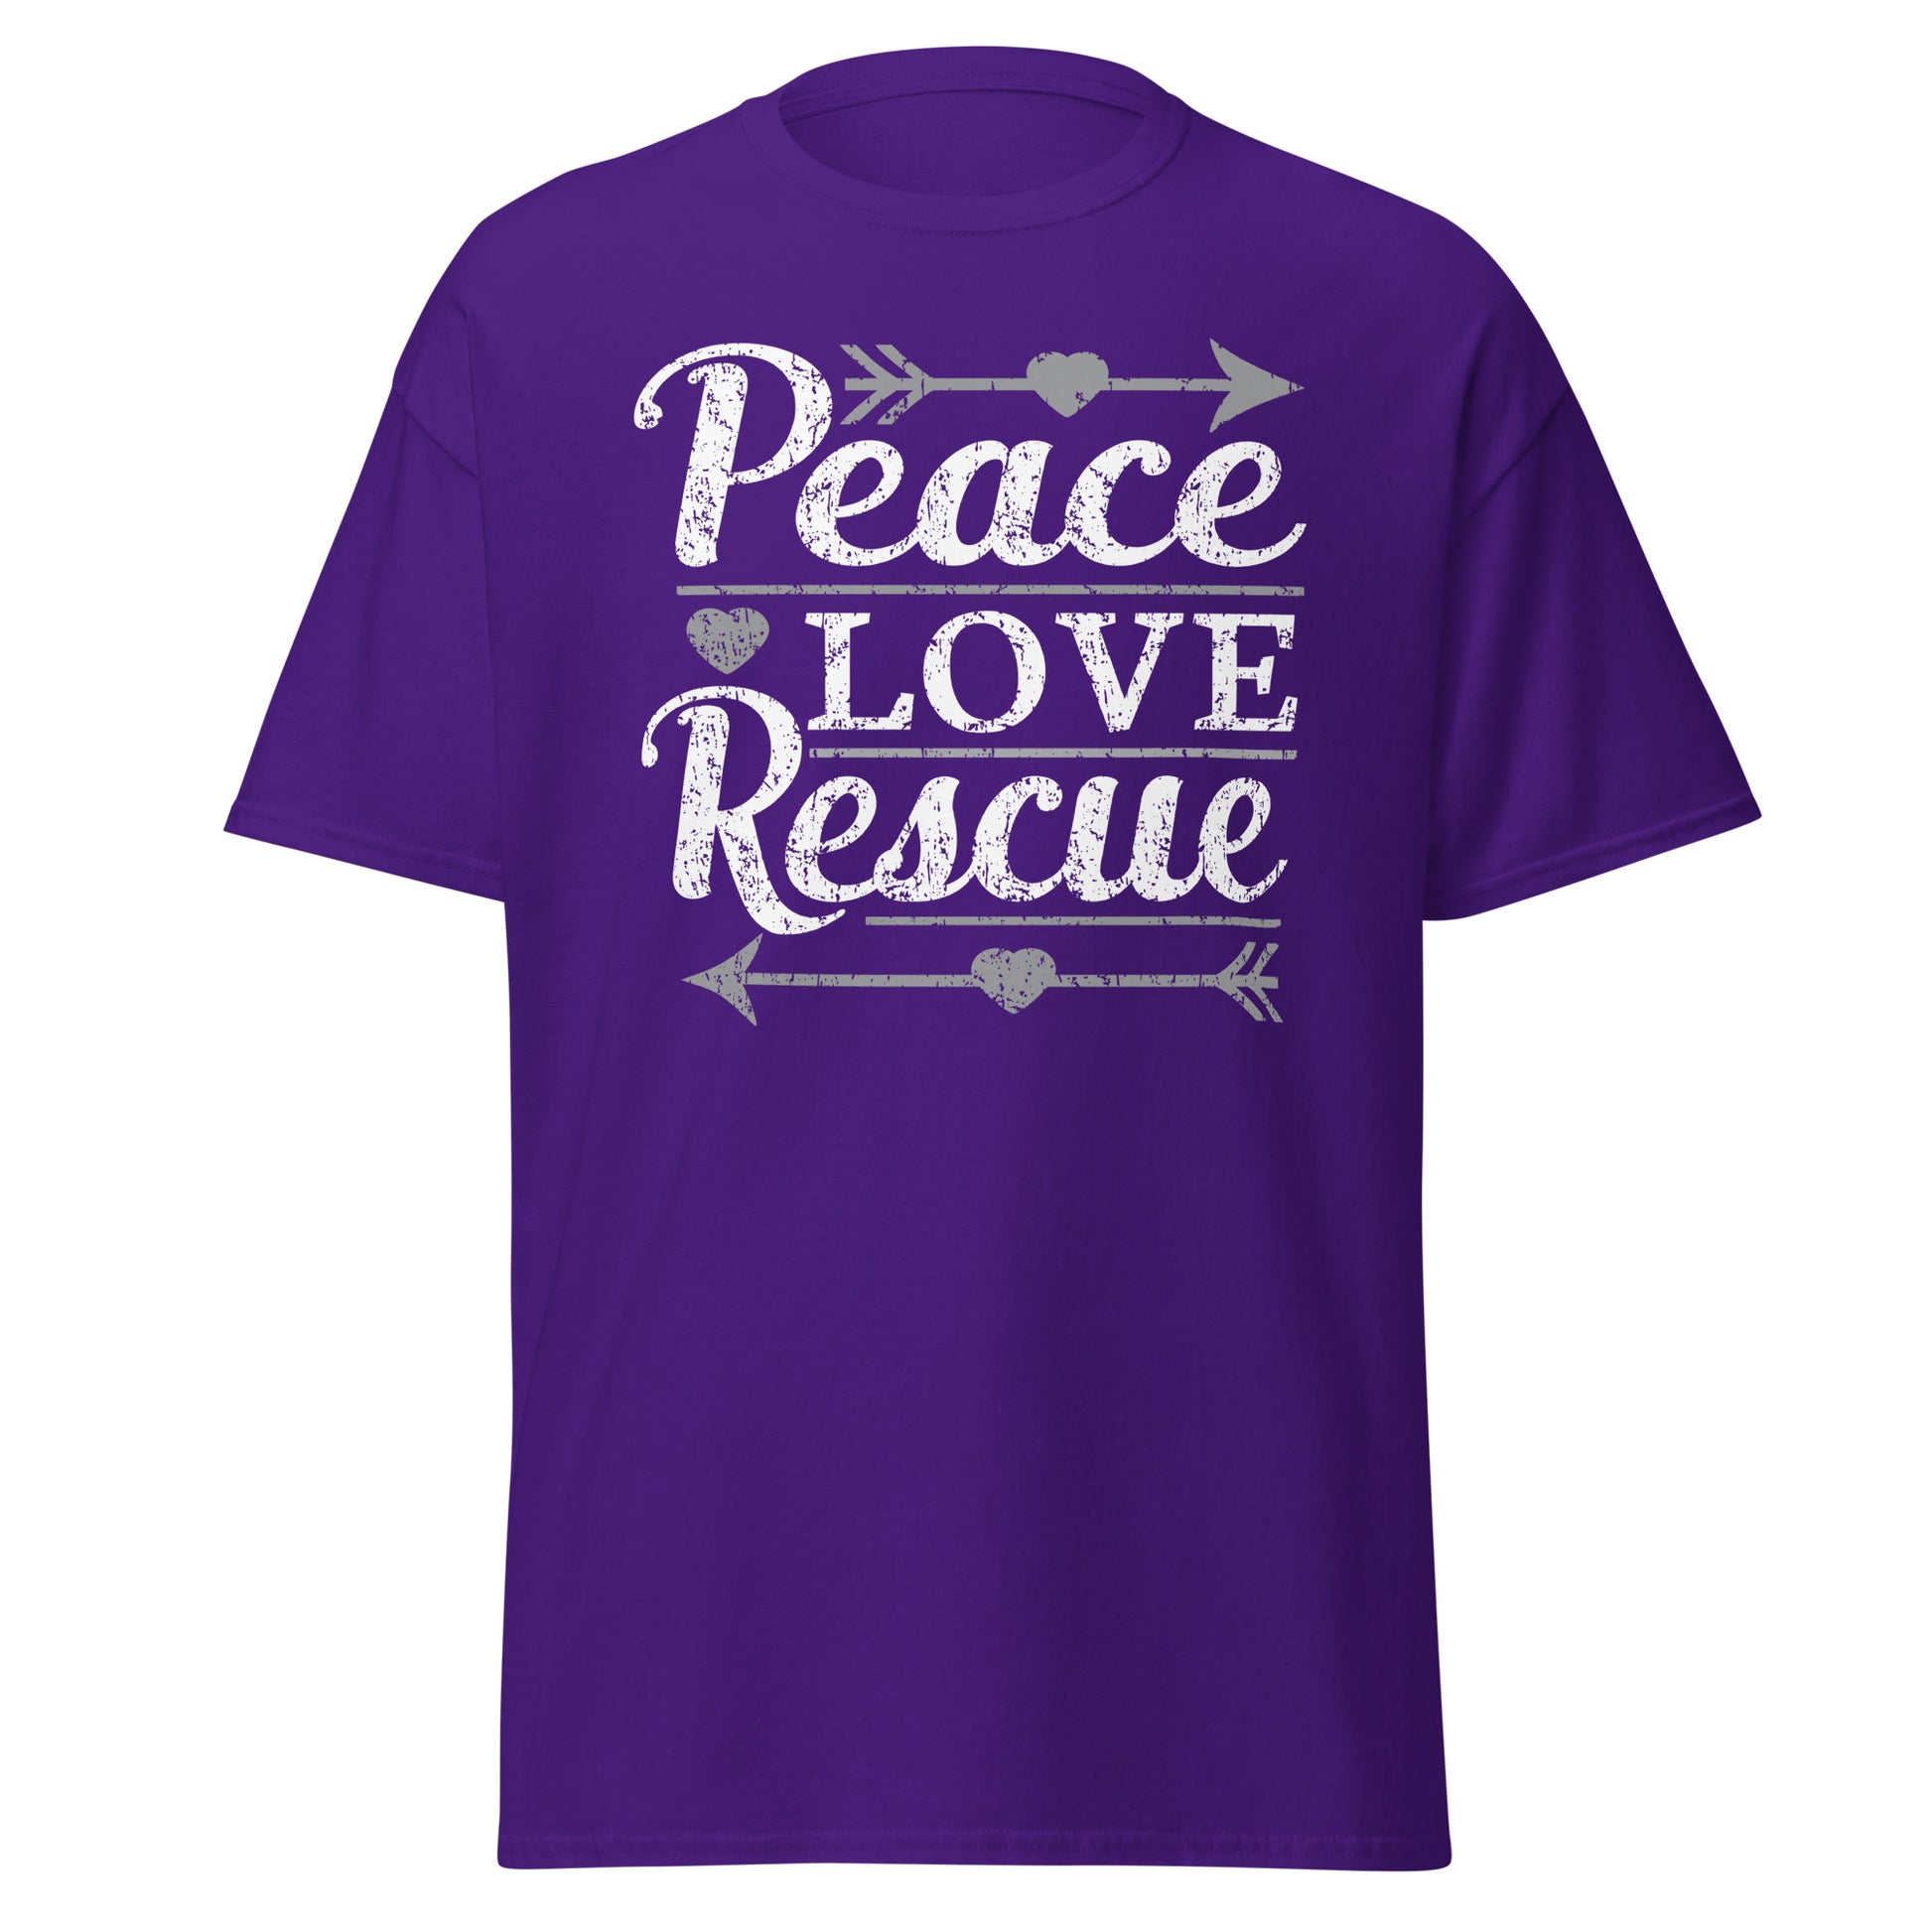 Peace love rescue men’s t-shirts by Dog Artistry Purple color